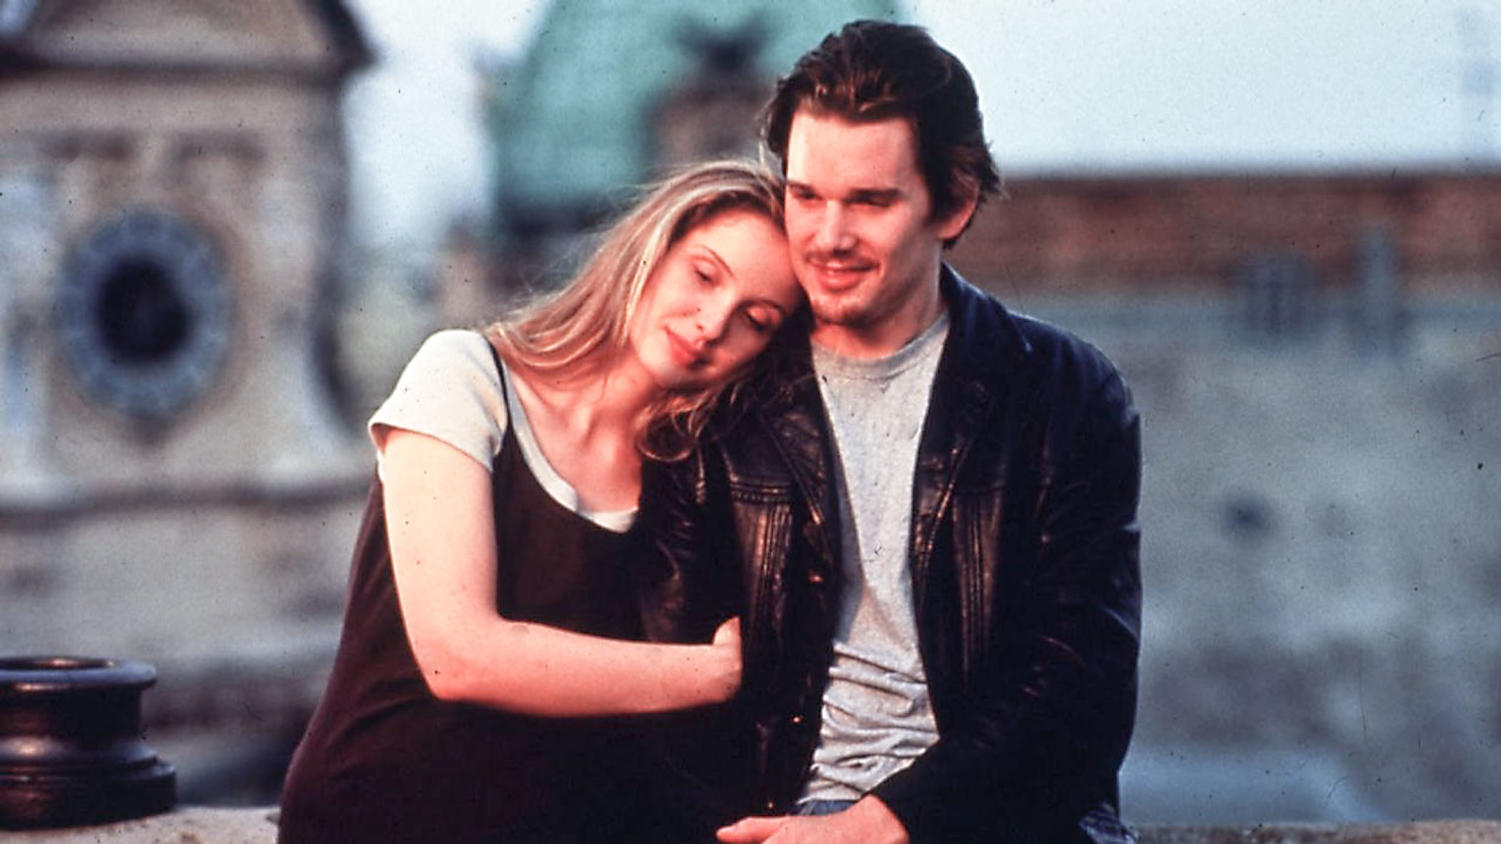 Ethan Hawke and Julie Delpy in 'Before Sunrise'